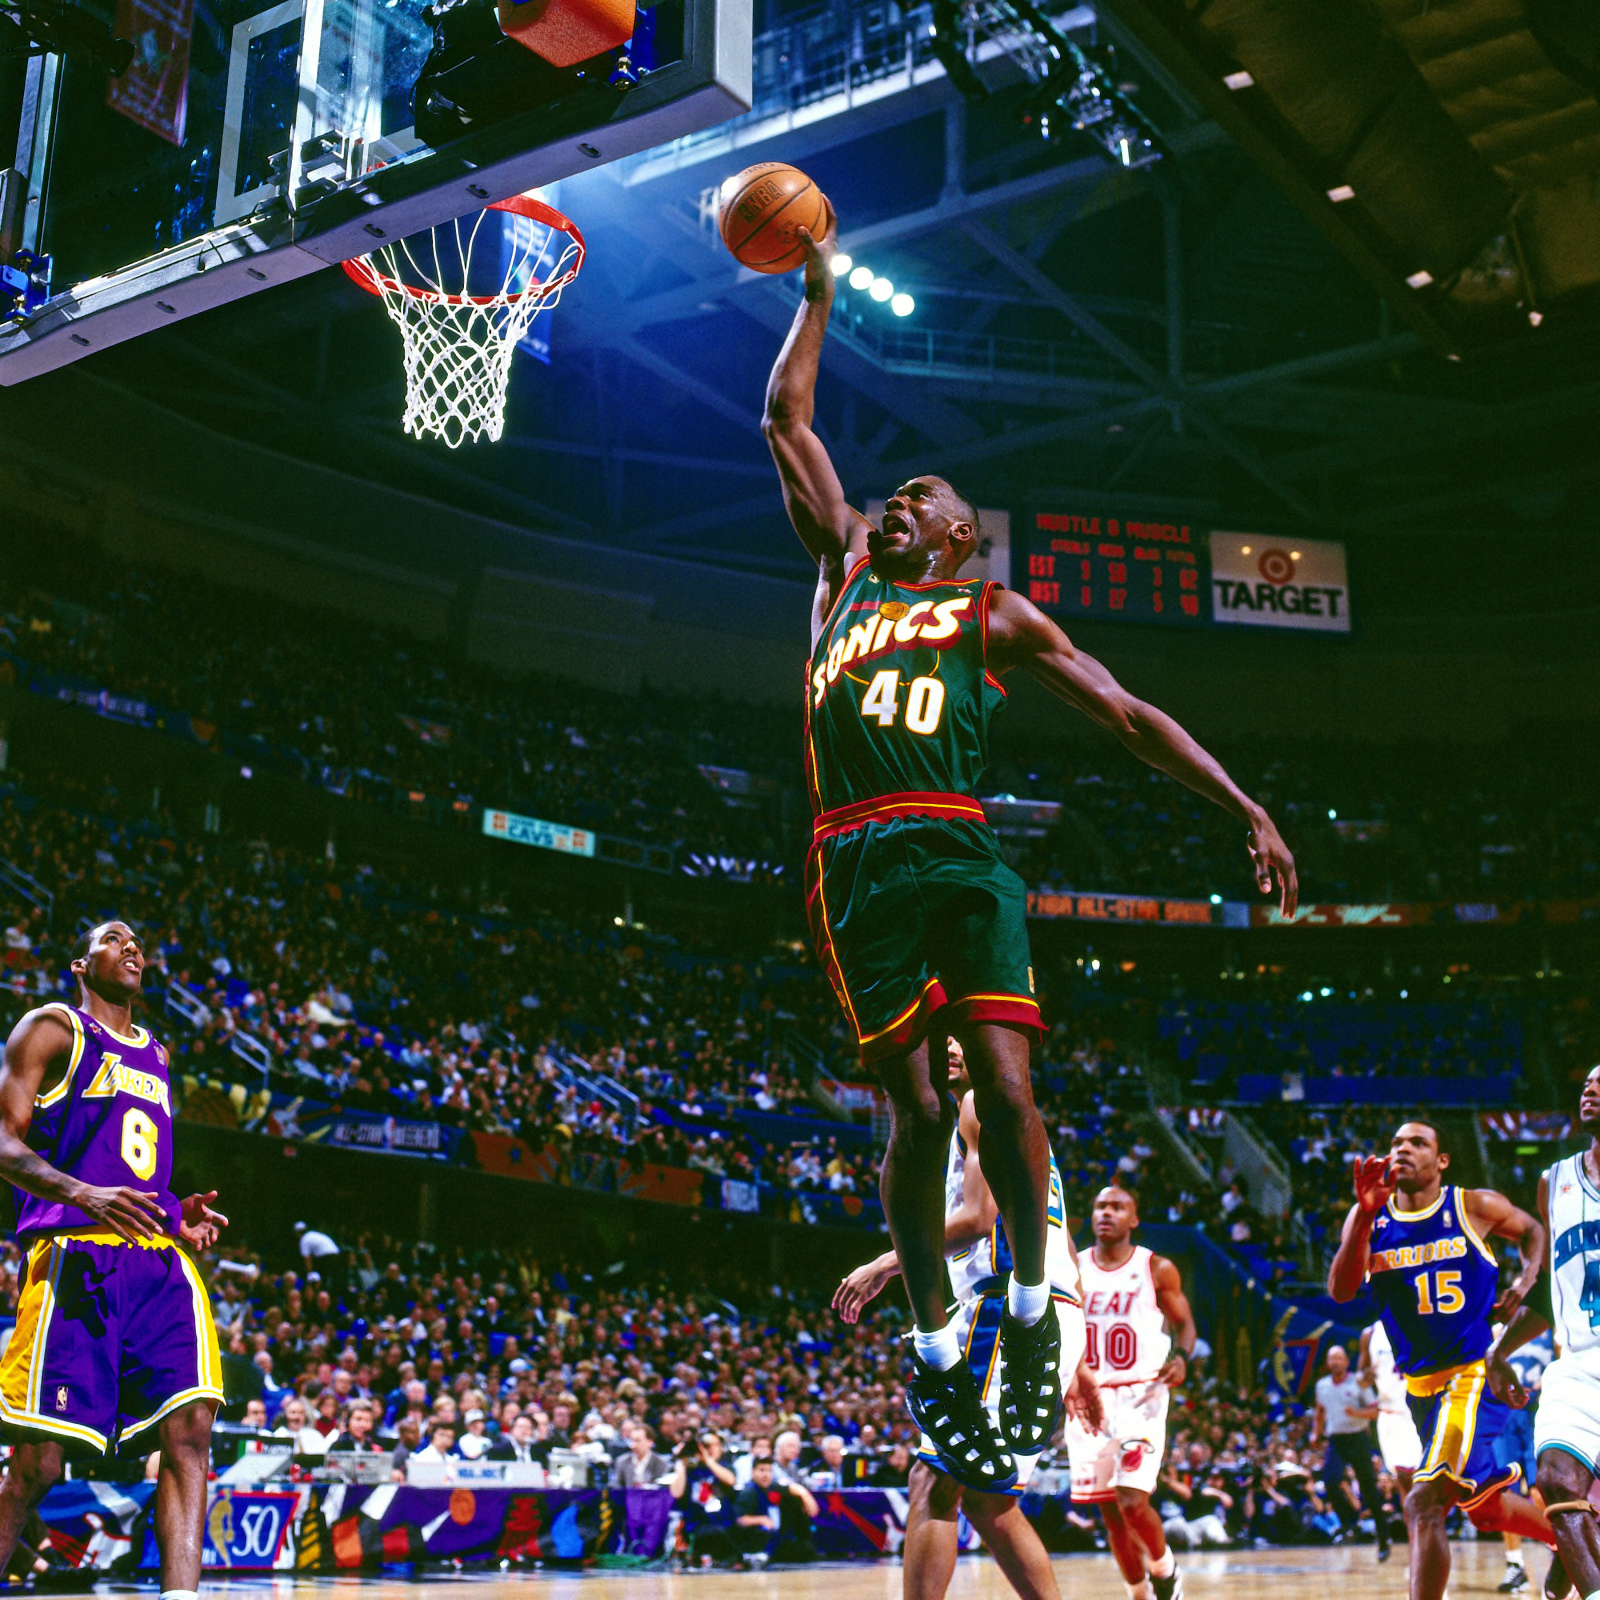 Is Shawn Kemp the best power forward in the NBA? - Quora